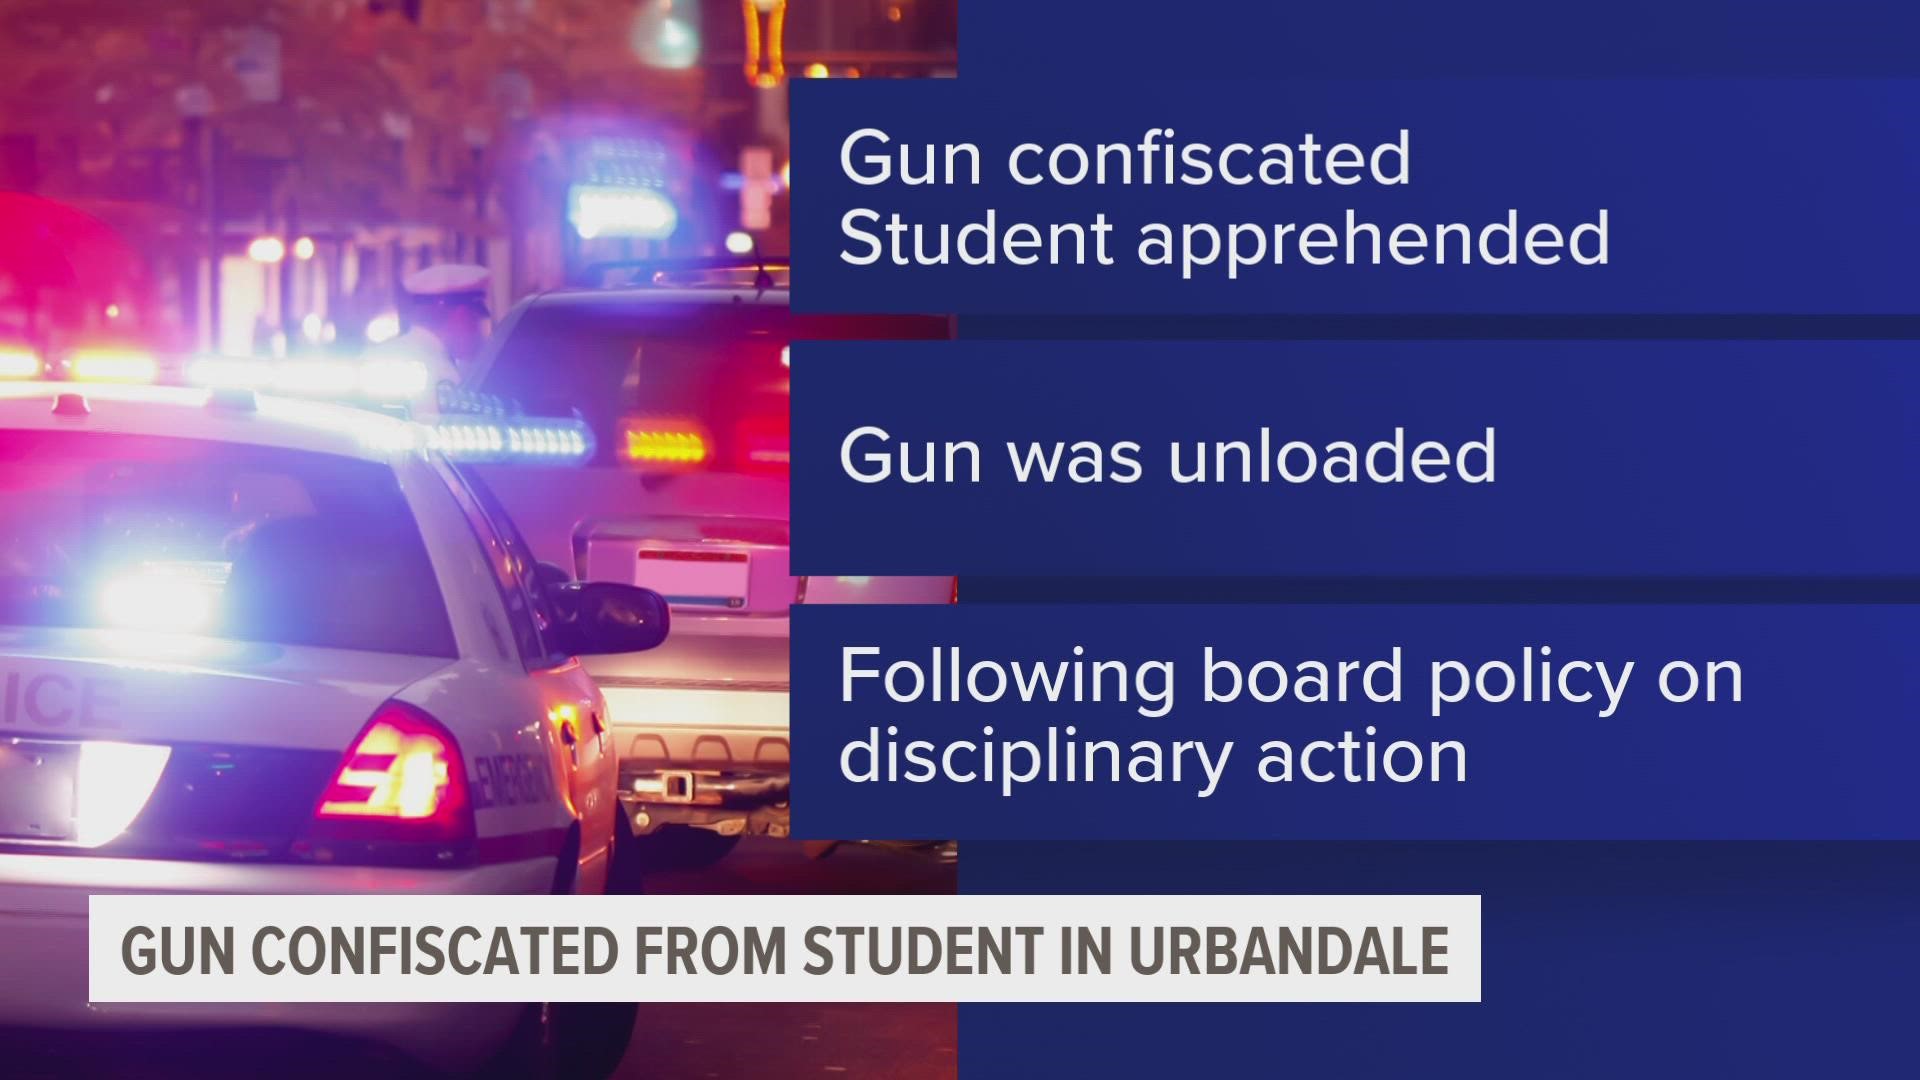 Law enforcement confiscated the gun and apprehended the student shortly after informing administration of the possible situation.